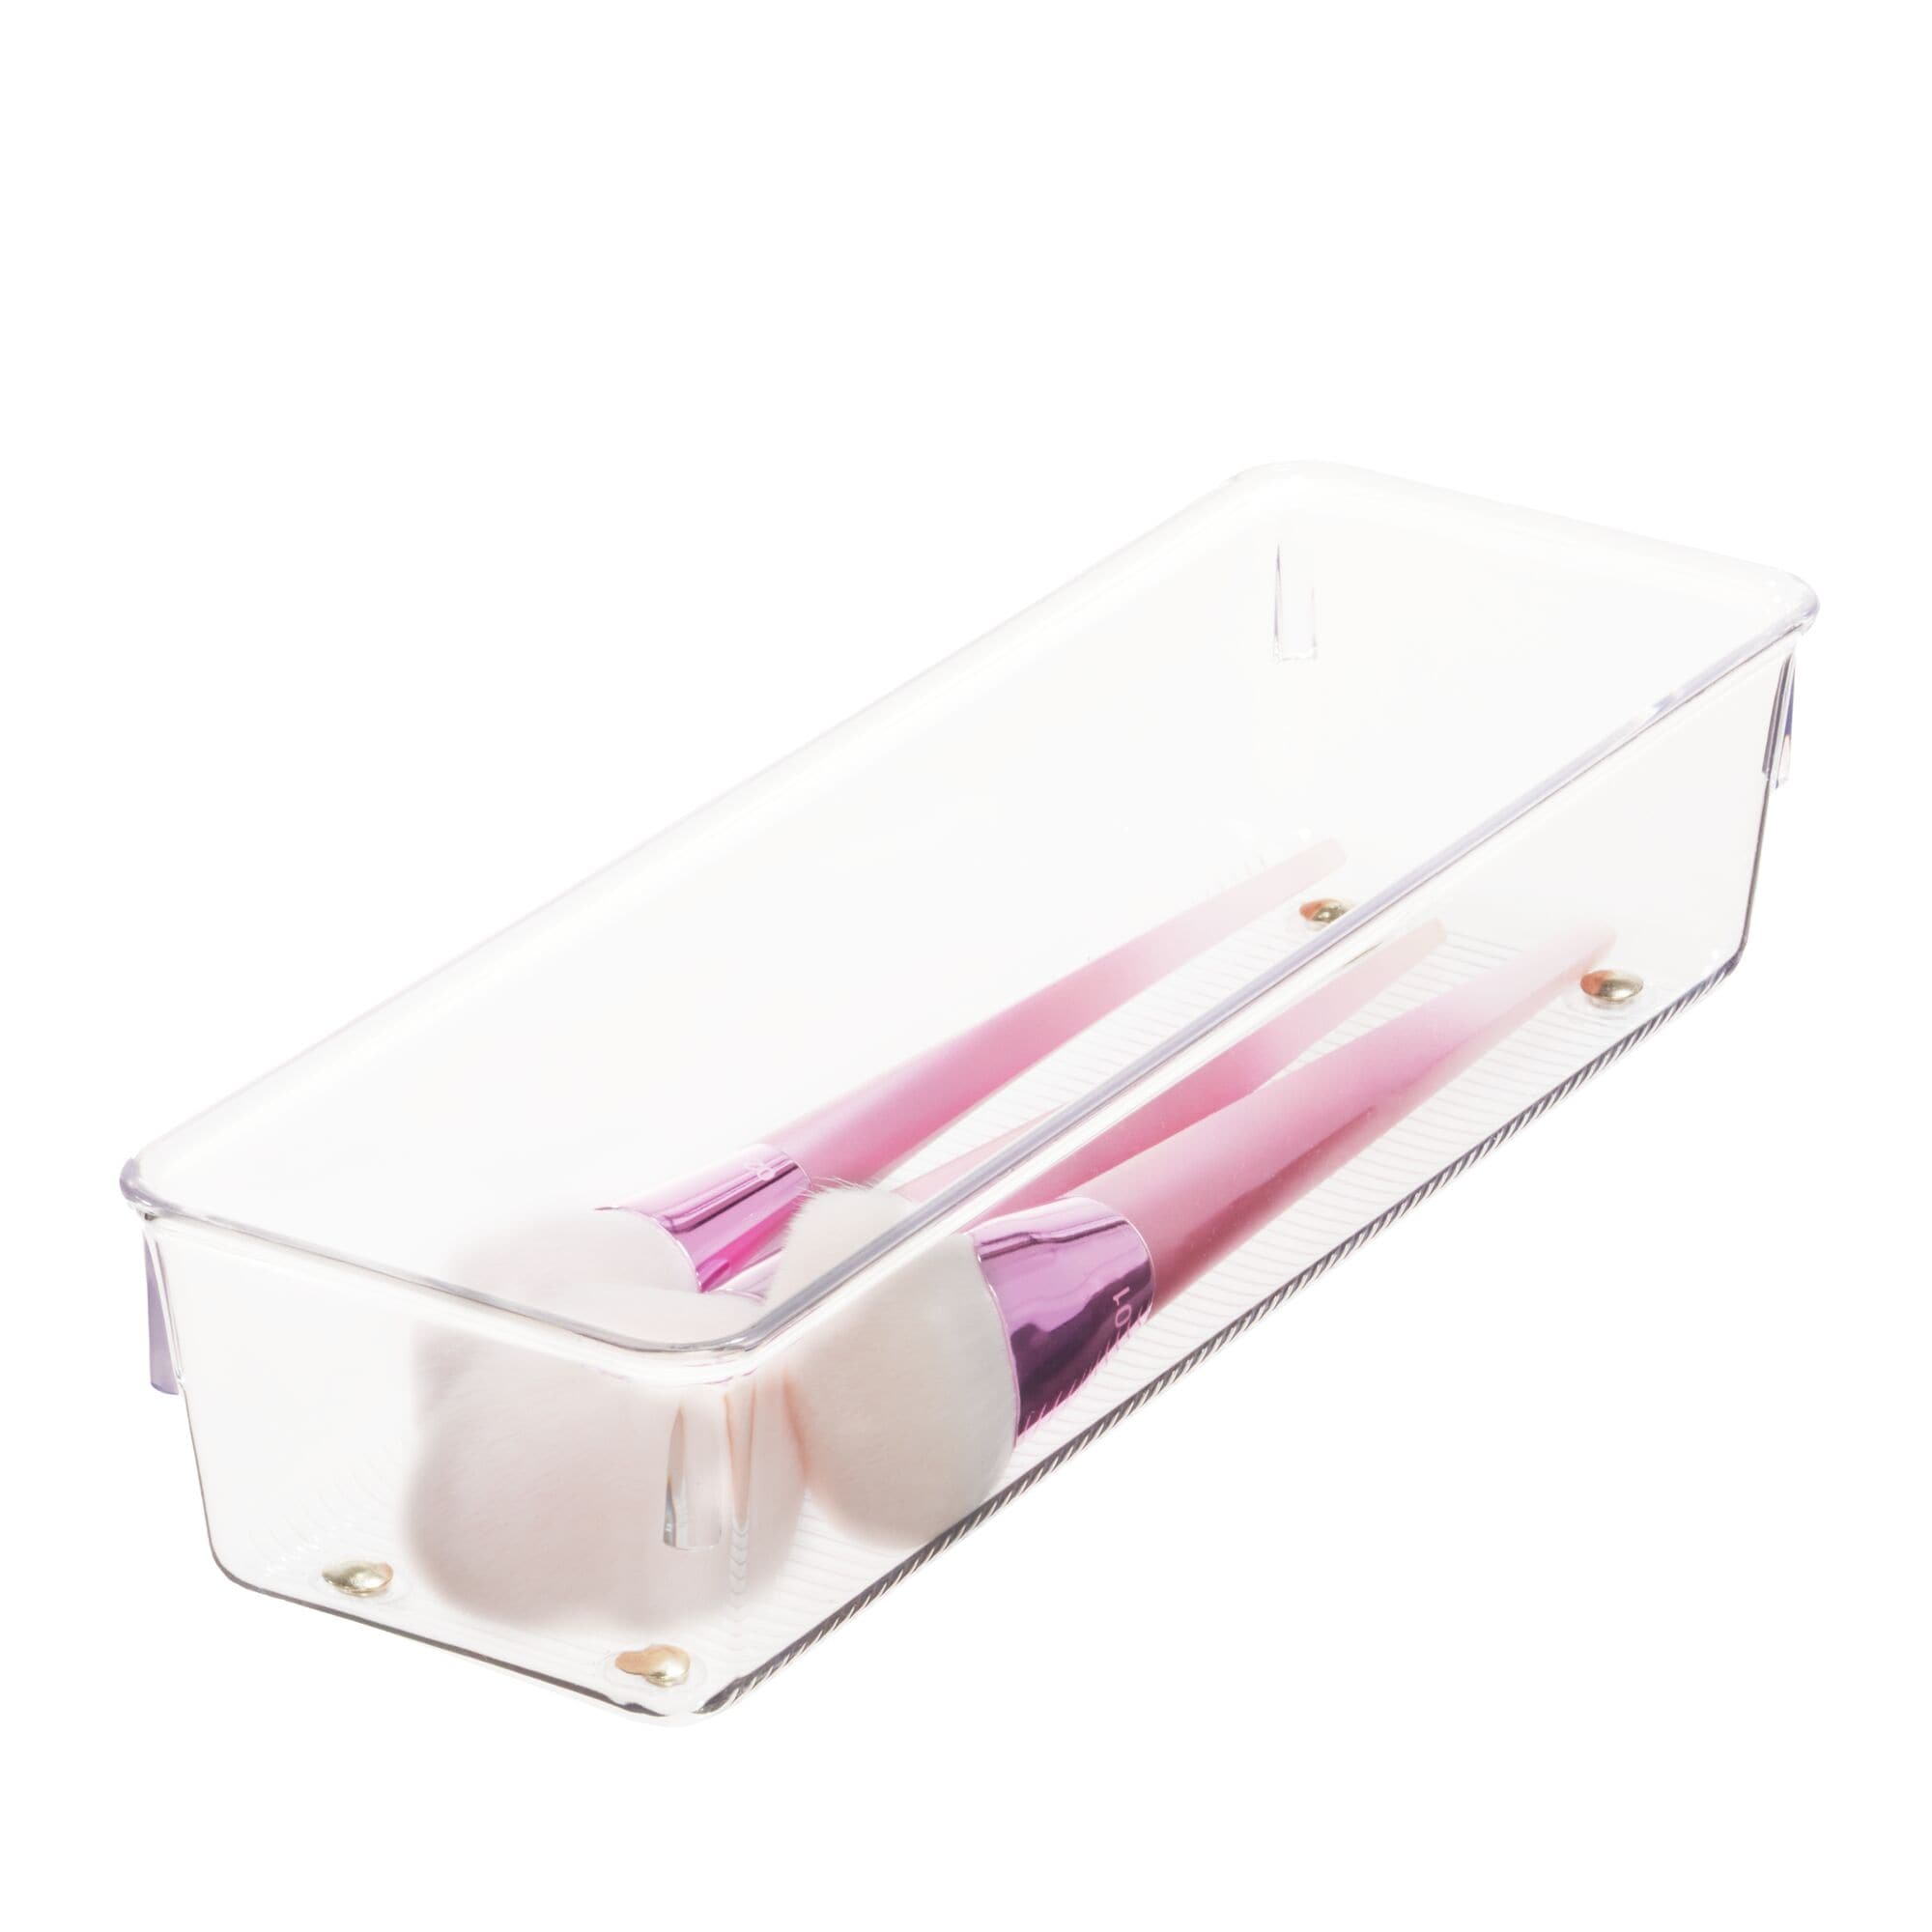 iDesign Pantry & Drawer Organizer, Clear, 6 x 11-1/2 x 3-1/2 In.